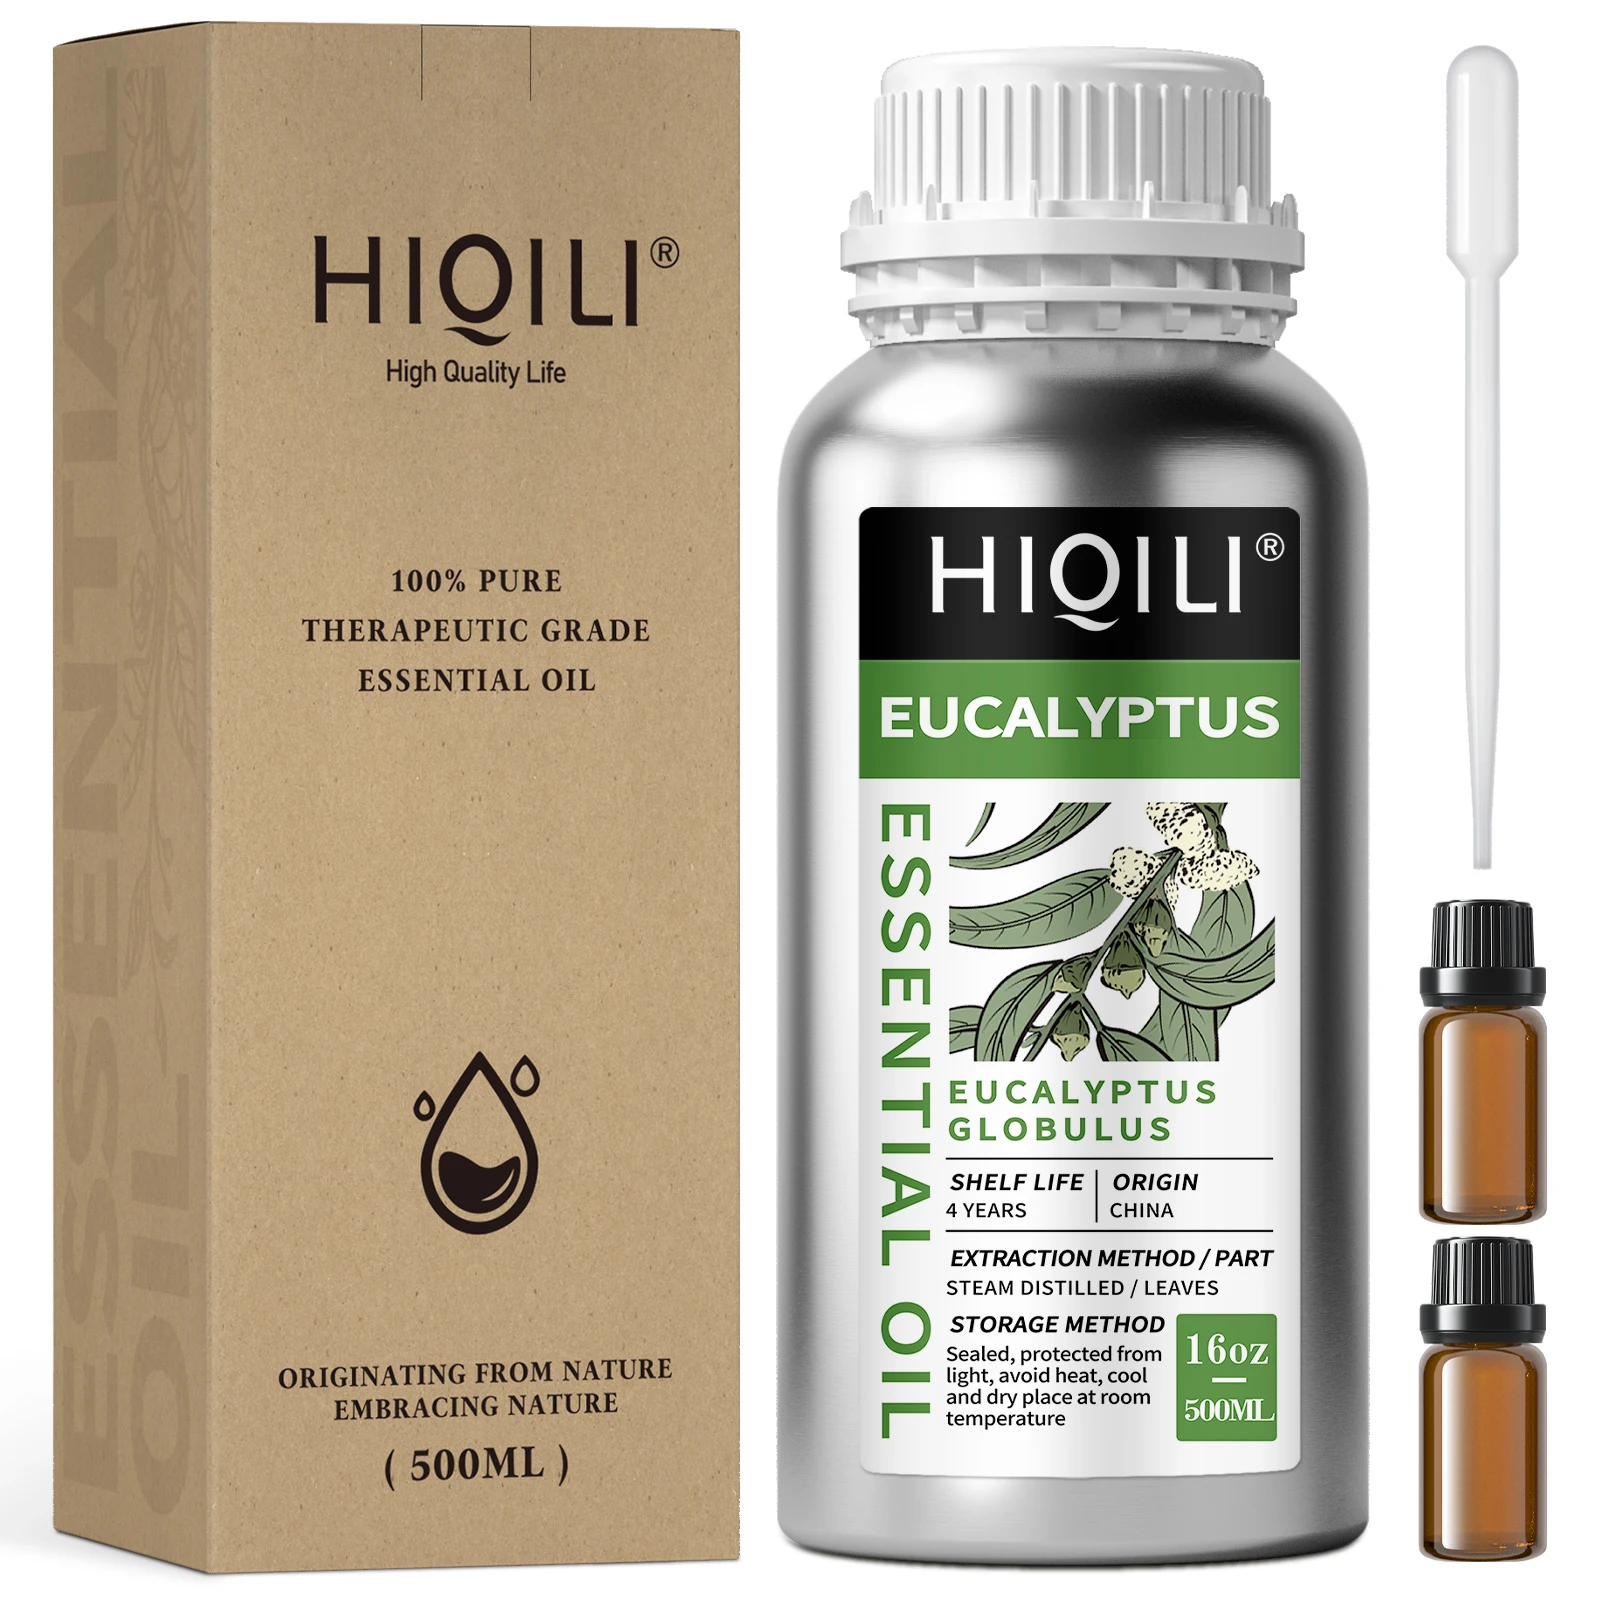 HIQILI 500ML Eucalyptus Essential Oils, 100% Pure Nature for Aromatherapy Used for Diffuser, Humidifier, Massage | Prevent Colds mayjam free shipping 500ml essential oil for woman and man aroma oil for making perfumes humidifier aromatic diffuser